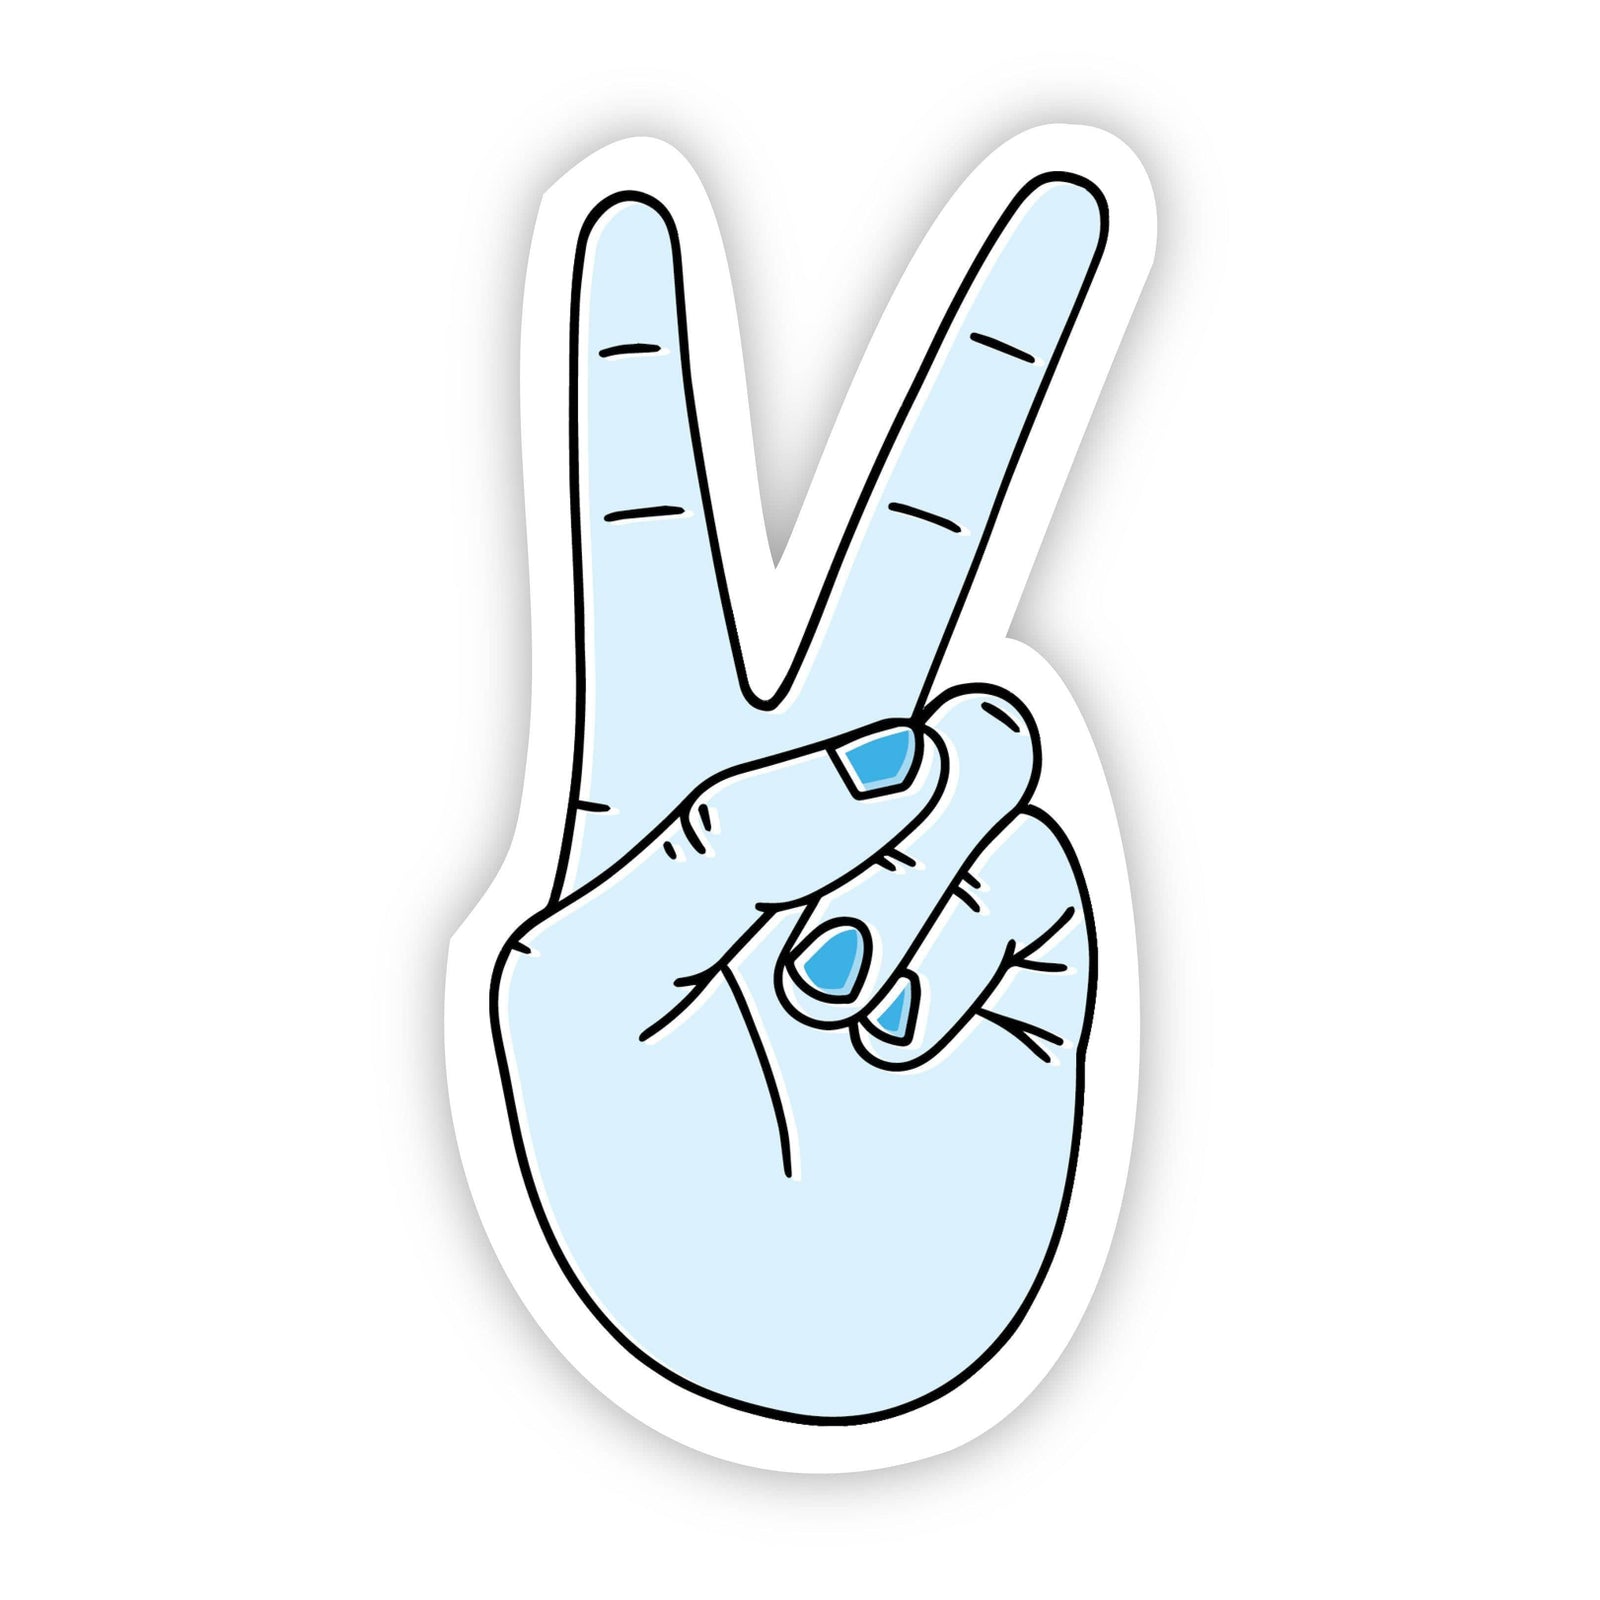 A sticker of a hand making the peace sign with blue painted nails - Pastel blue